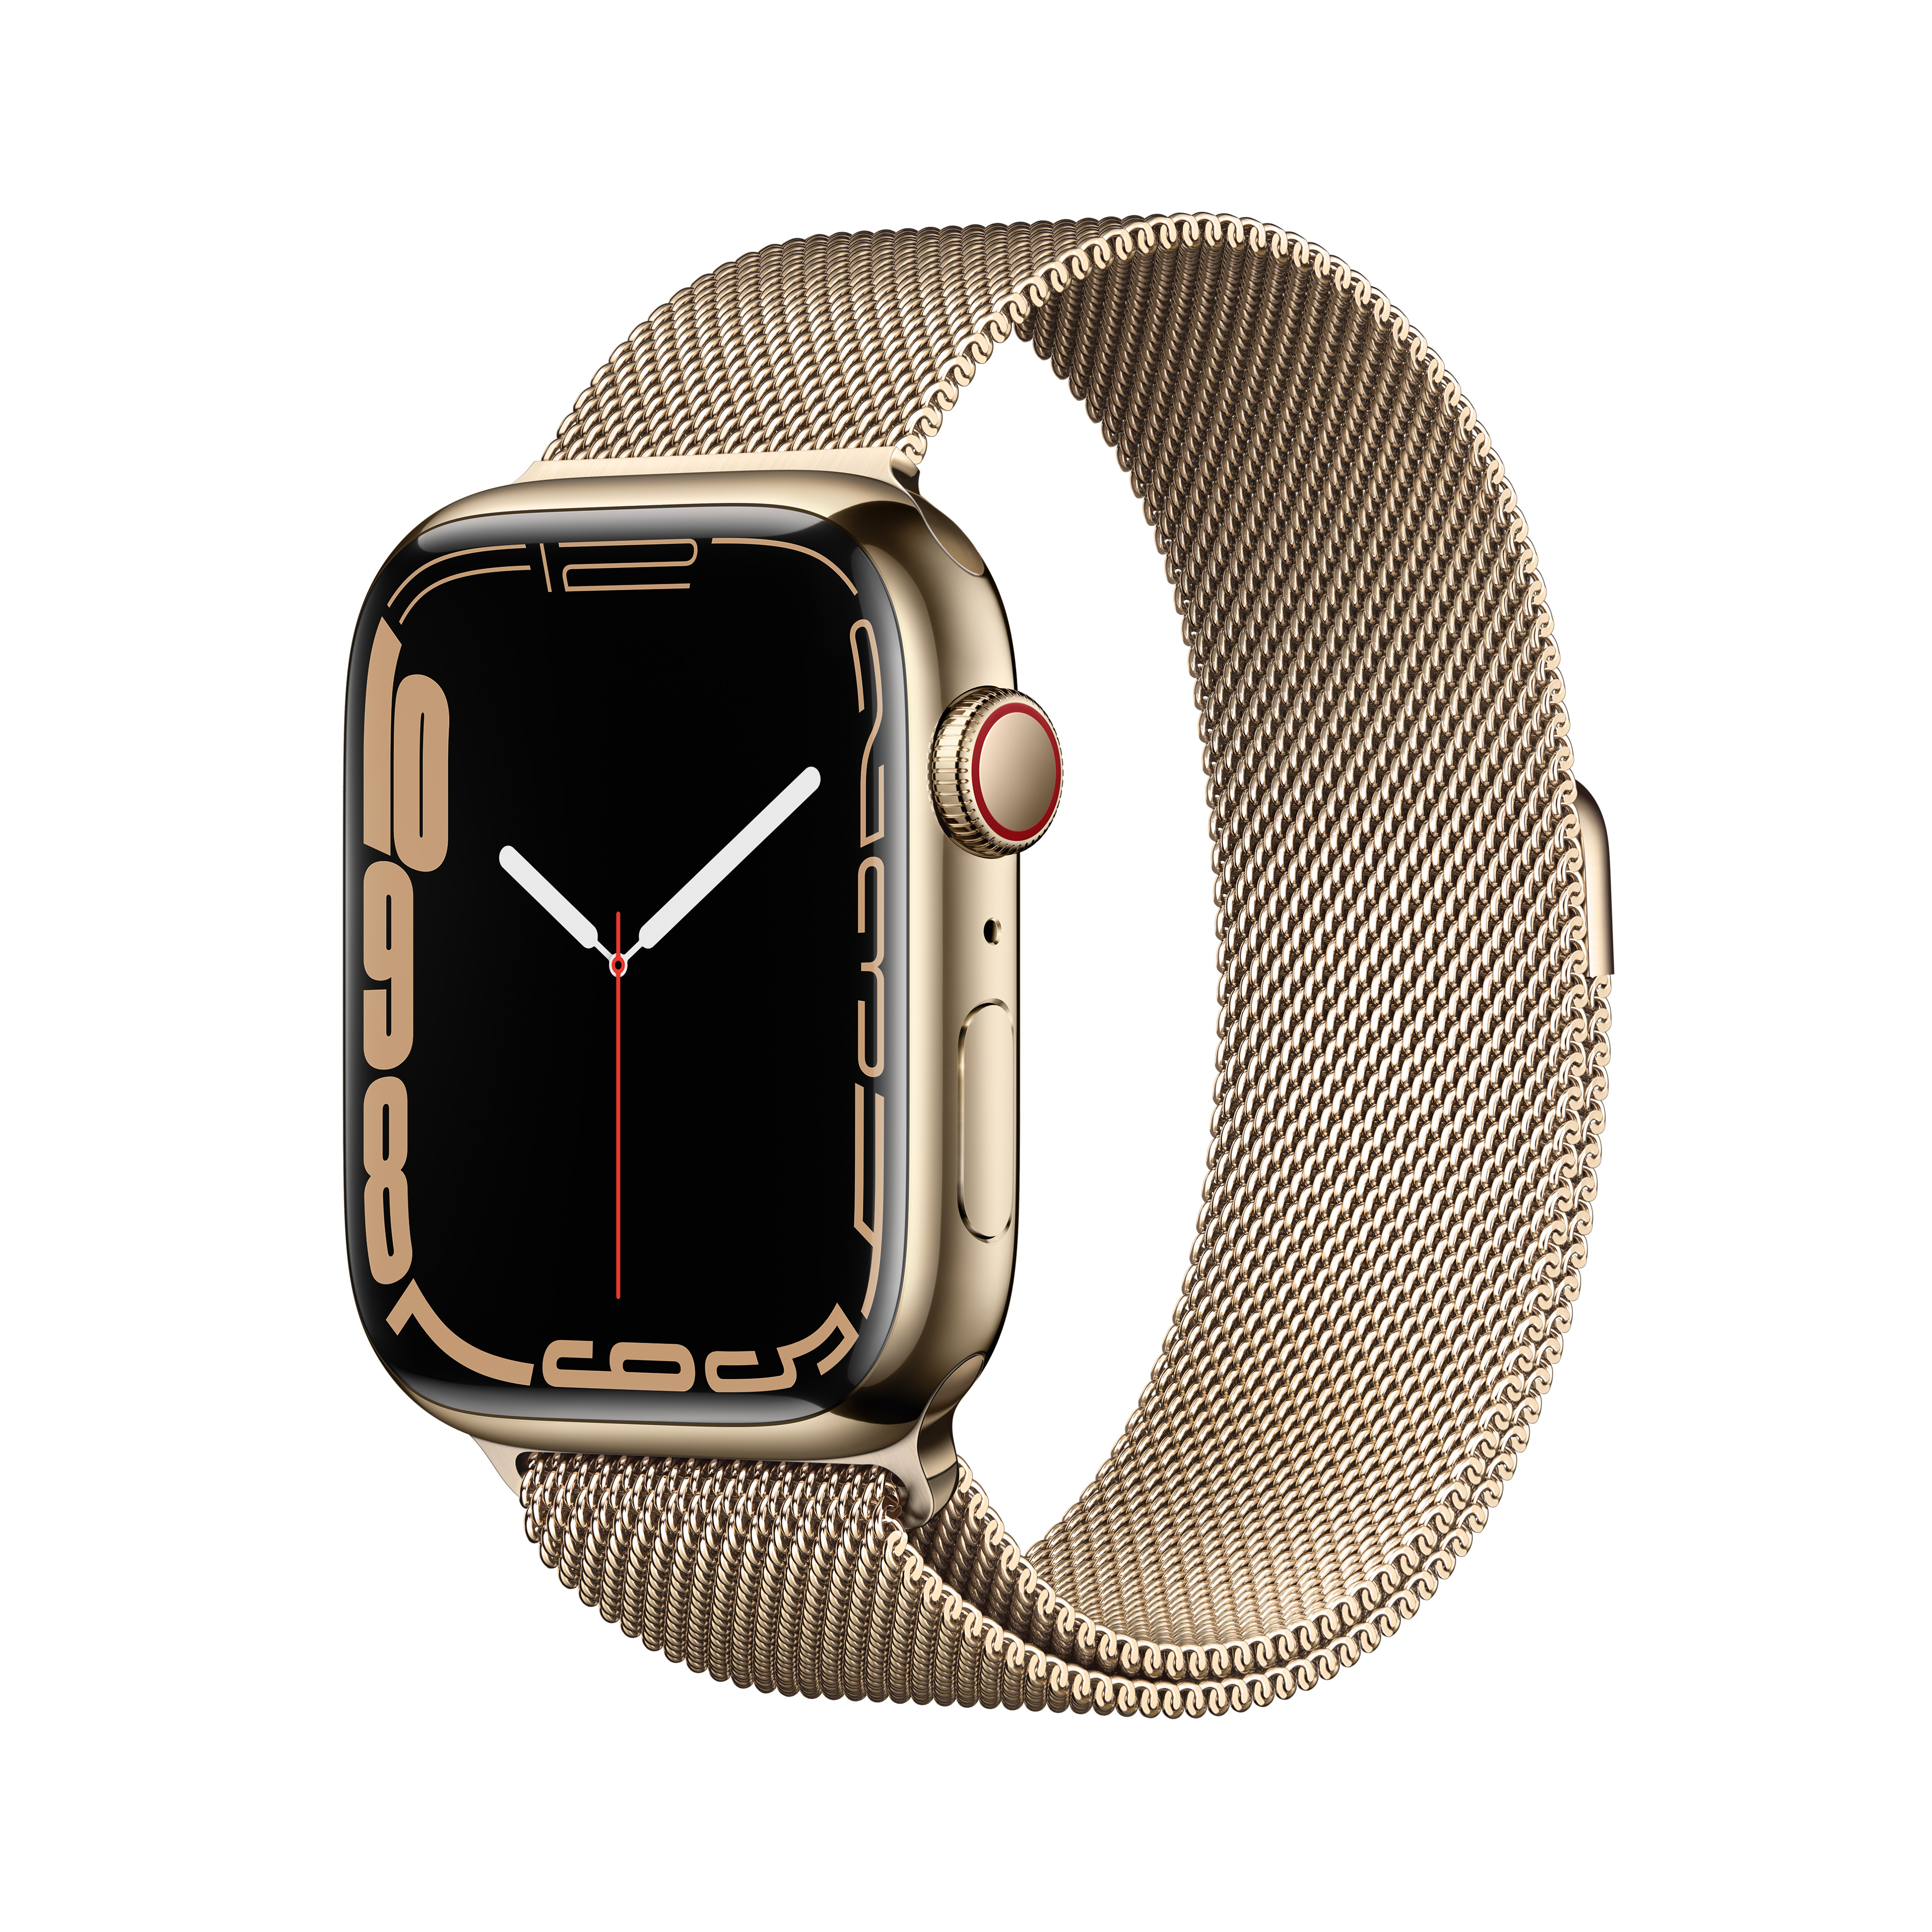 Apple_Watch_Series_7_Cell_45mm_Gold_Stainless_Steel_Gold_Milanese_Loop_PDP_Image_Position-1__VN.jpg